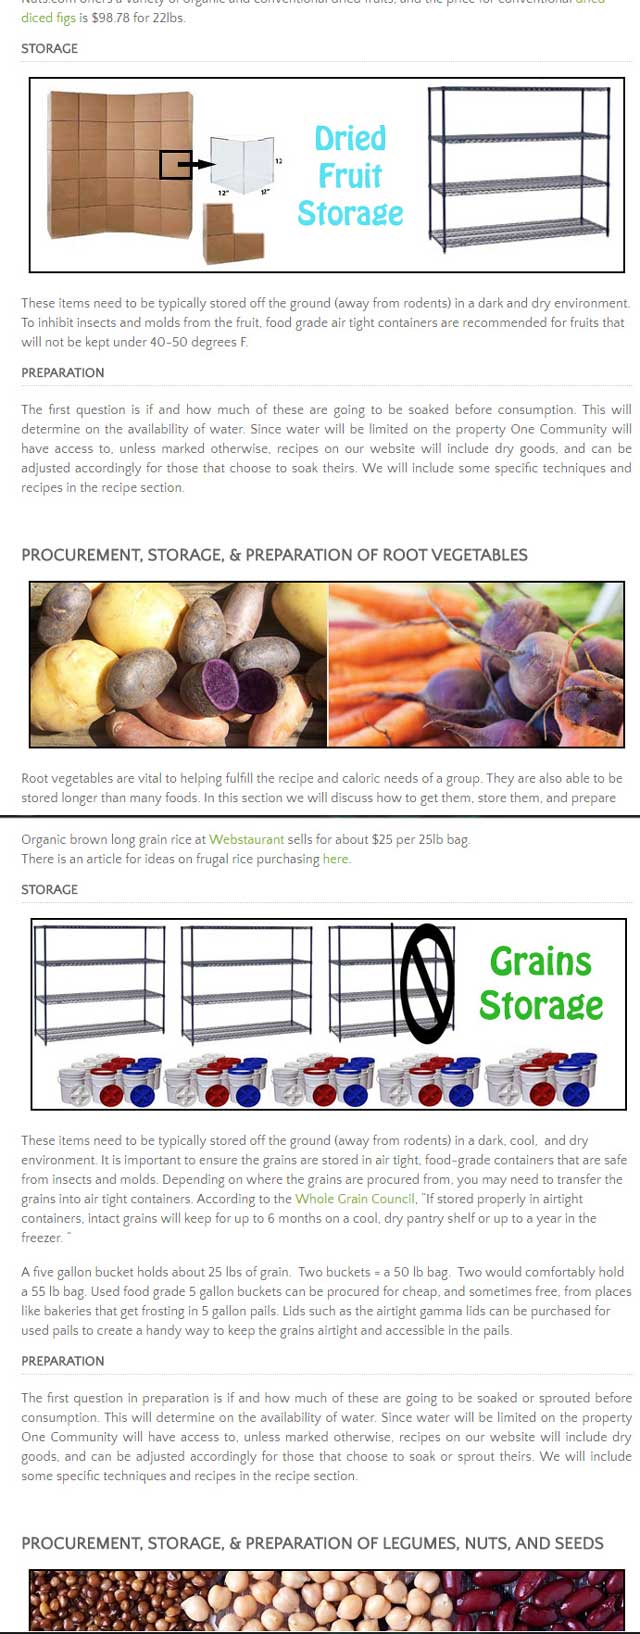 This week, the core team did the calculations and created images for the storage details for two bulk goods sections on the Food Self-sufficiency Transition Plan page. We did one section for grains and one for dried fruits, and added the images to the page as you see here: